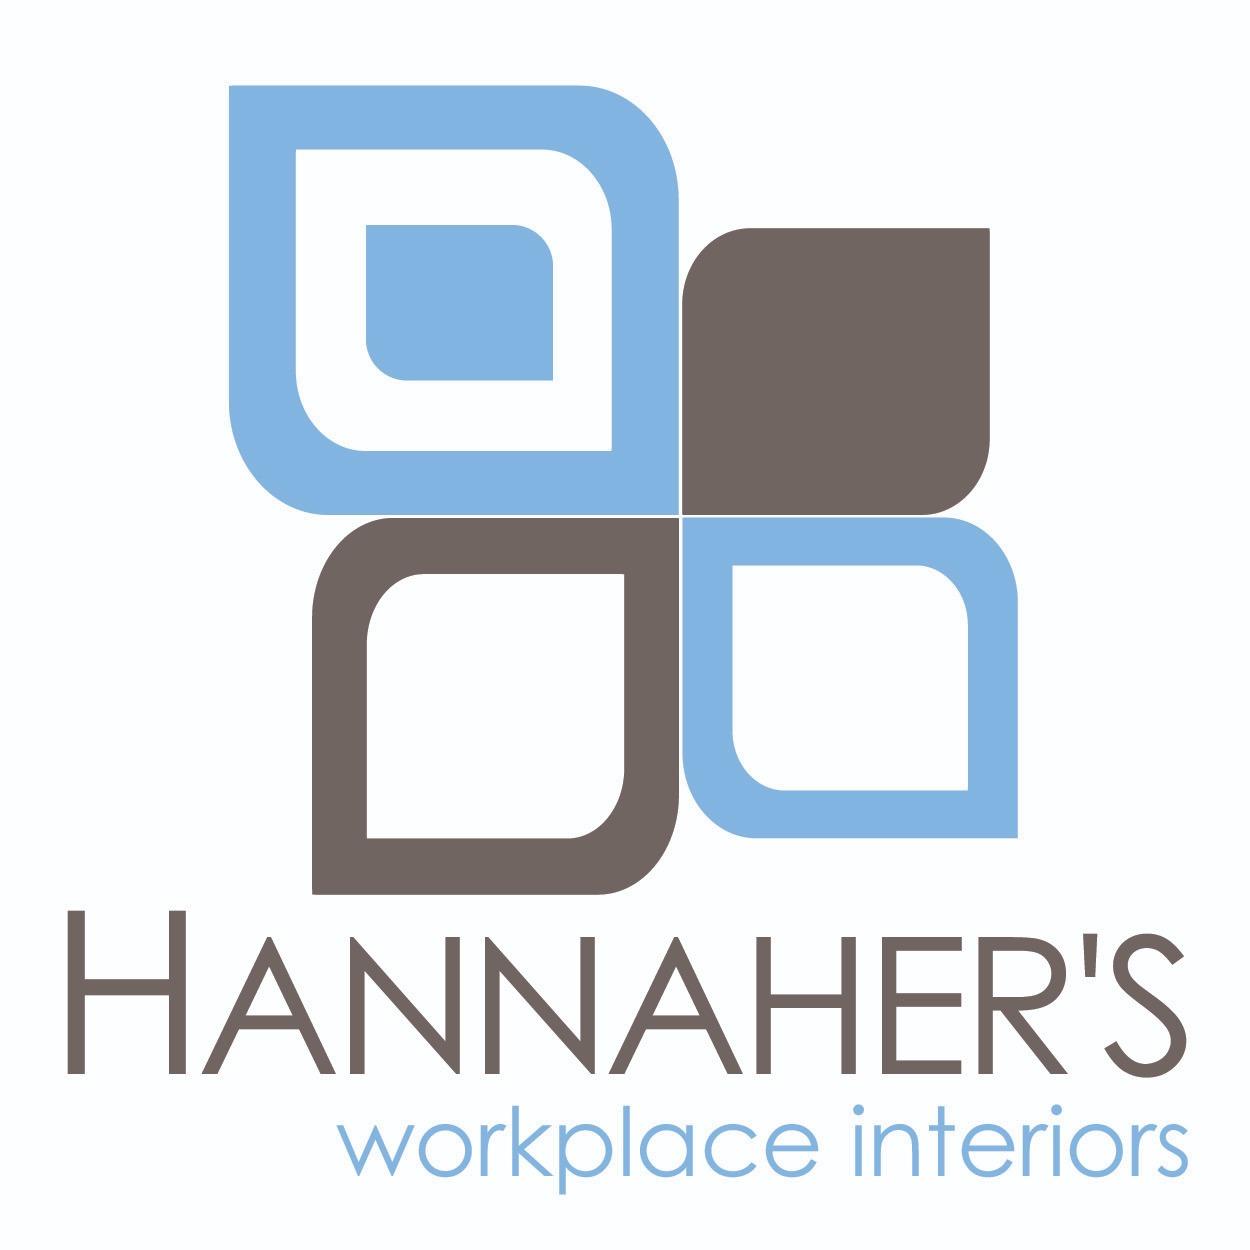 Hannaher's Workplace Interiors (Formerly Gaffaney's) Logo